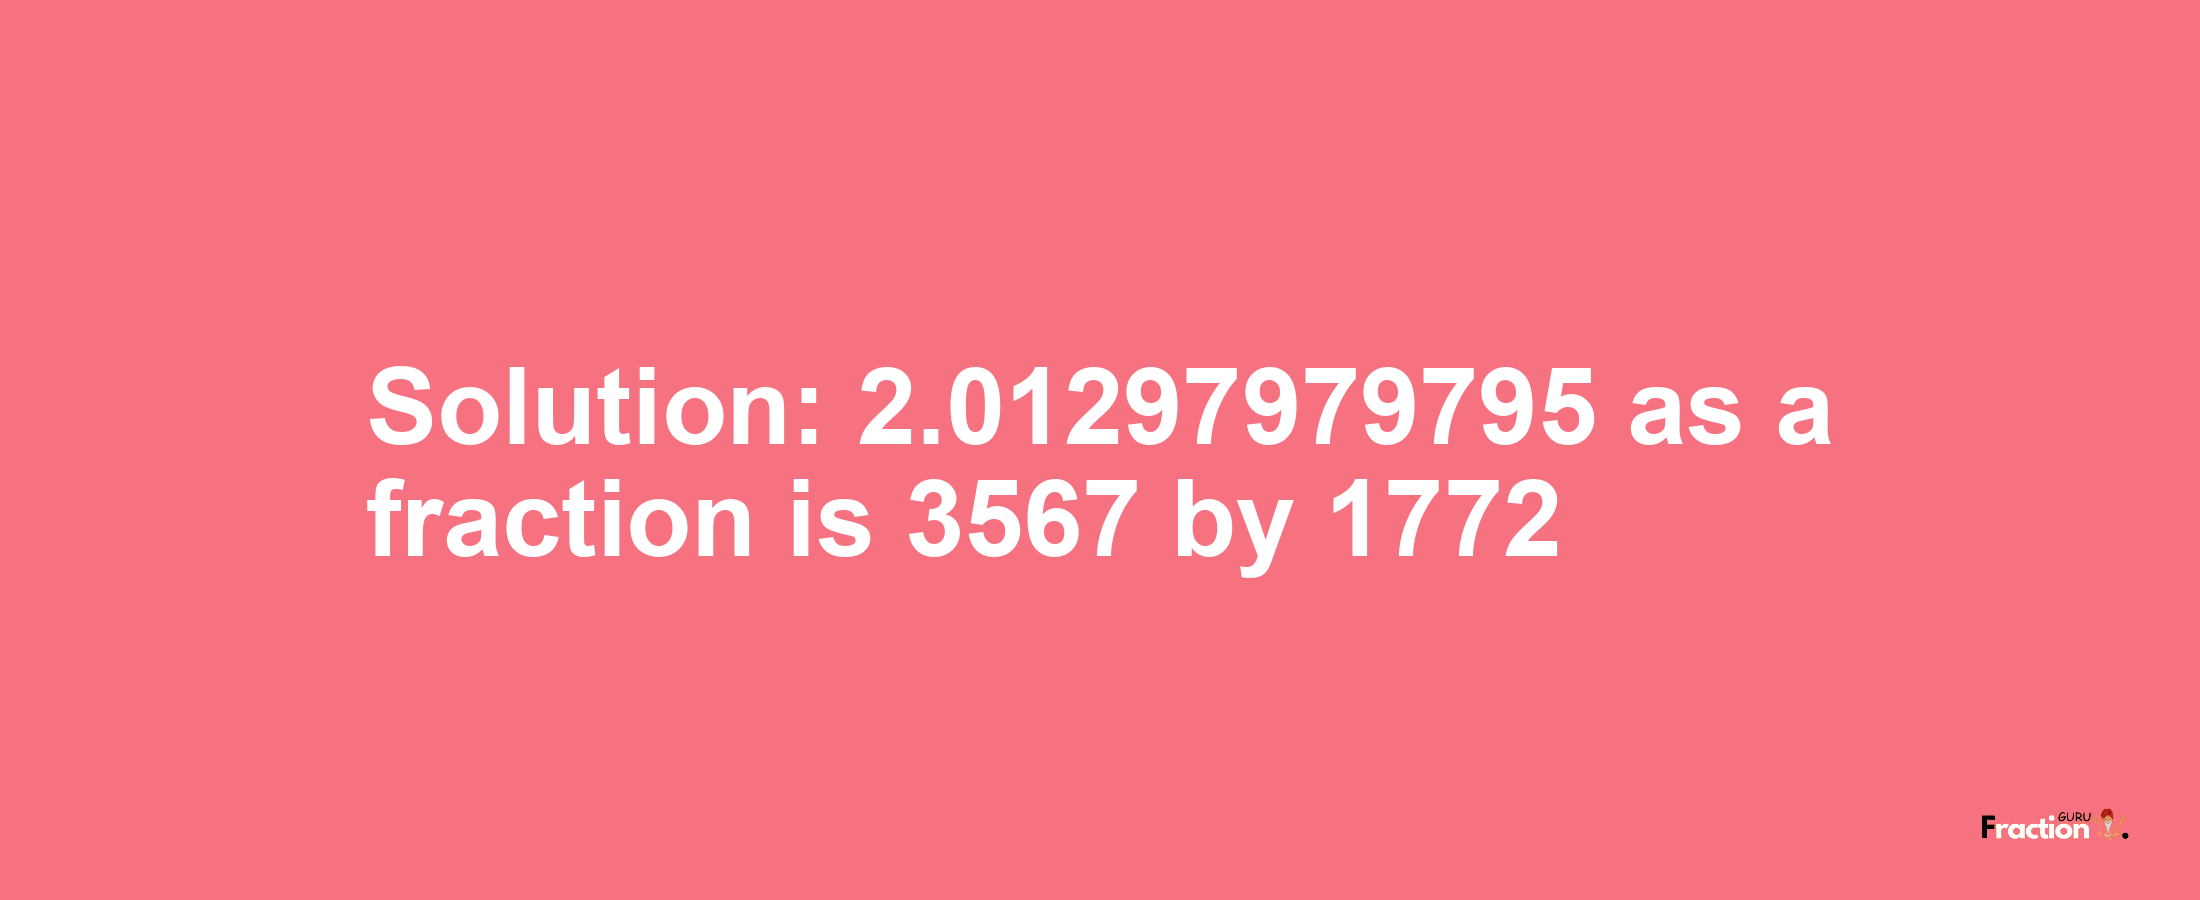 Solution:2.01297979795 as a fraction is 3567/1772